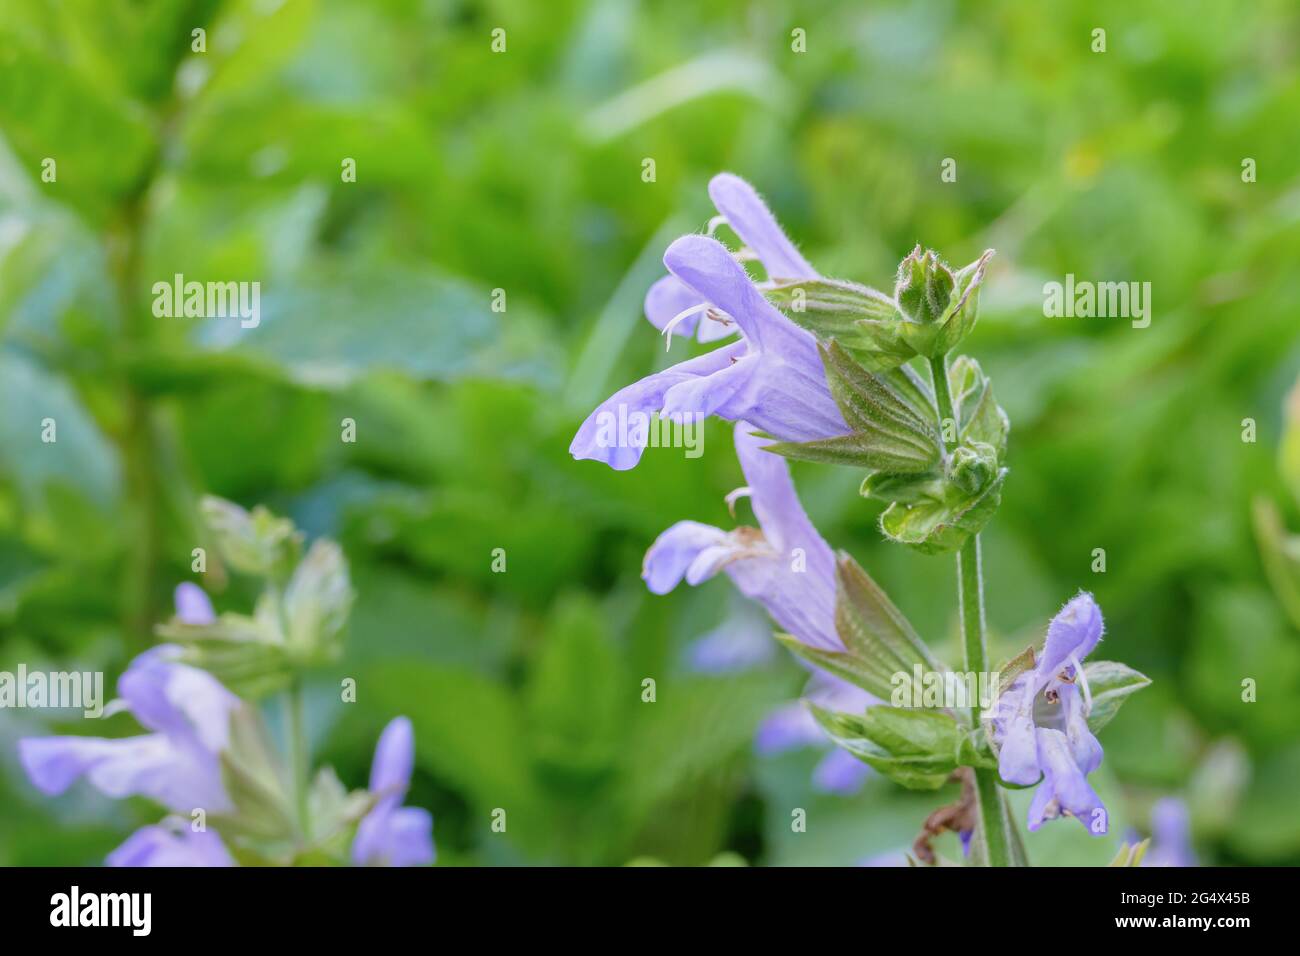 detail of sage flowers on defocused green background outdoors Stock Photo